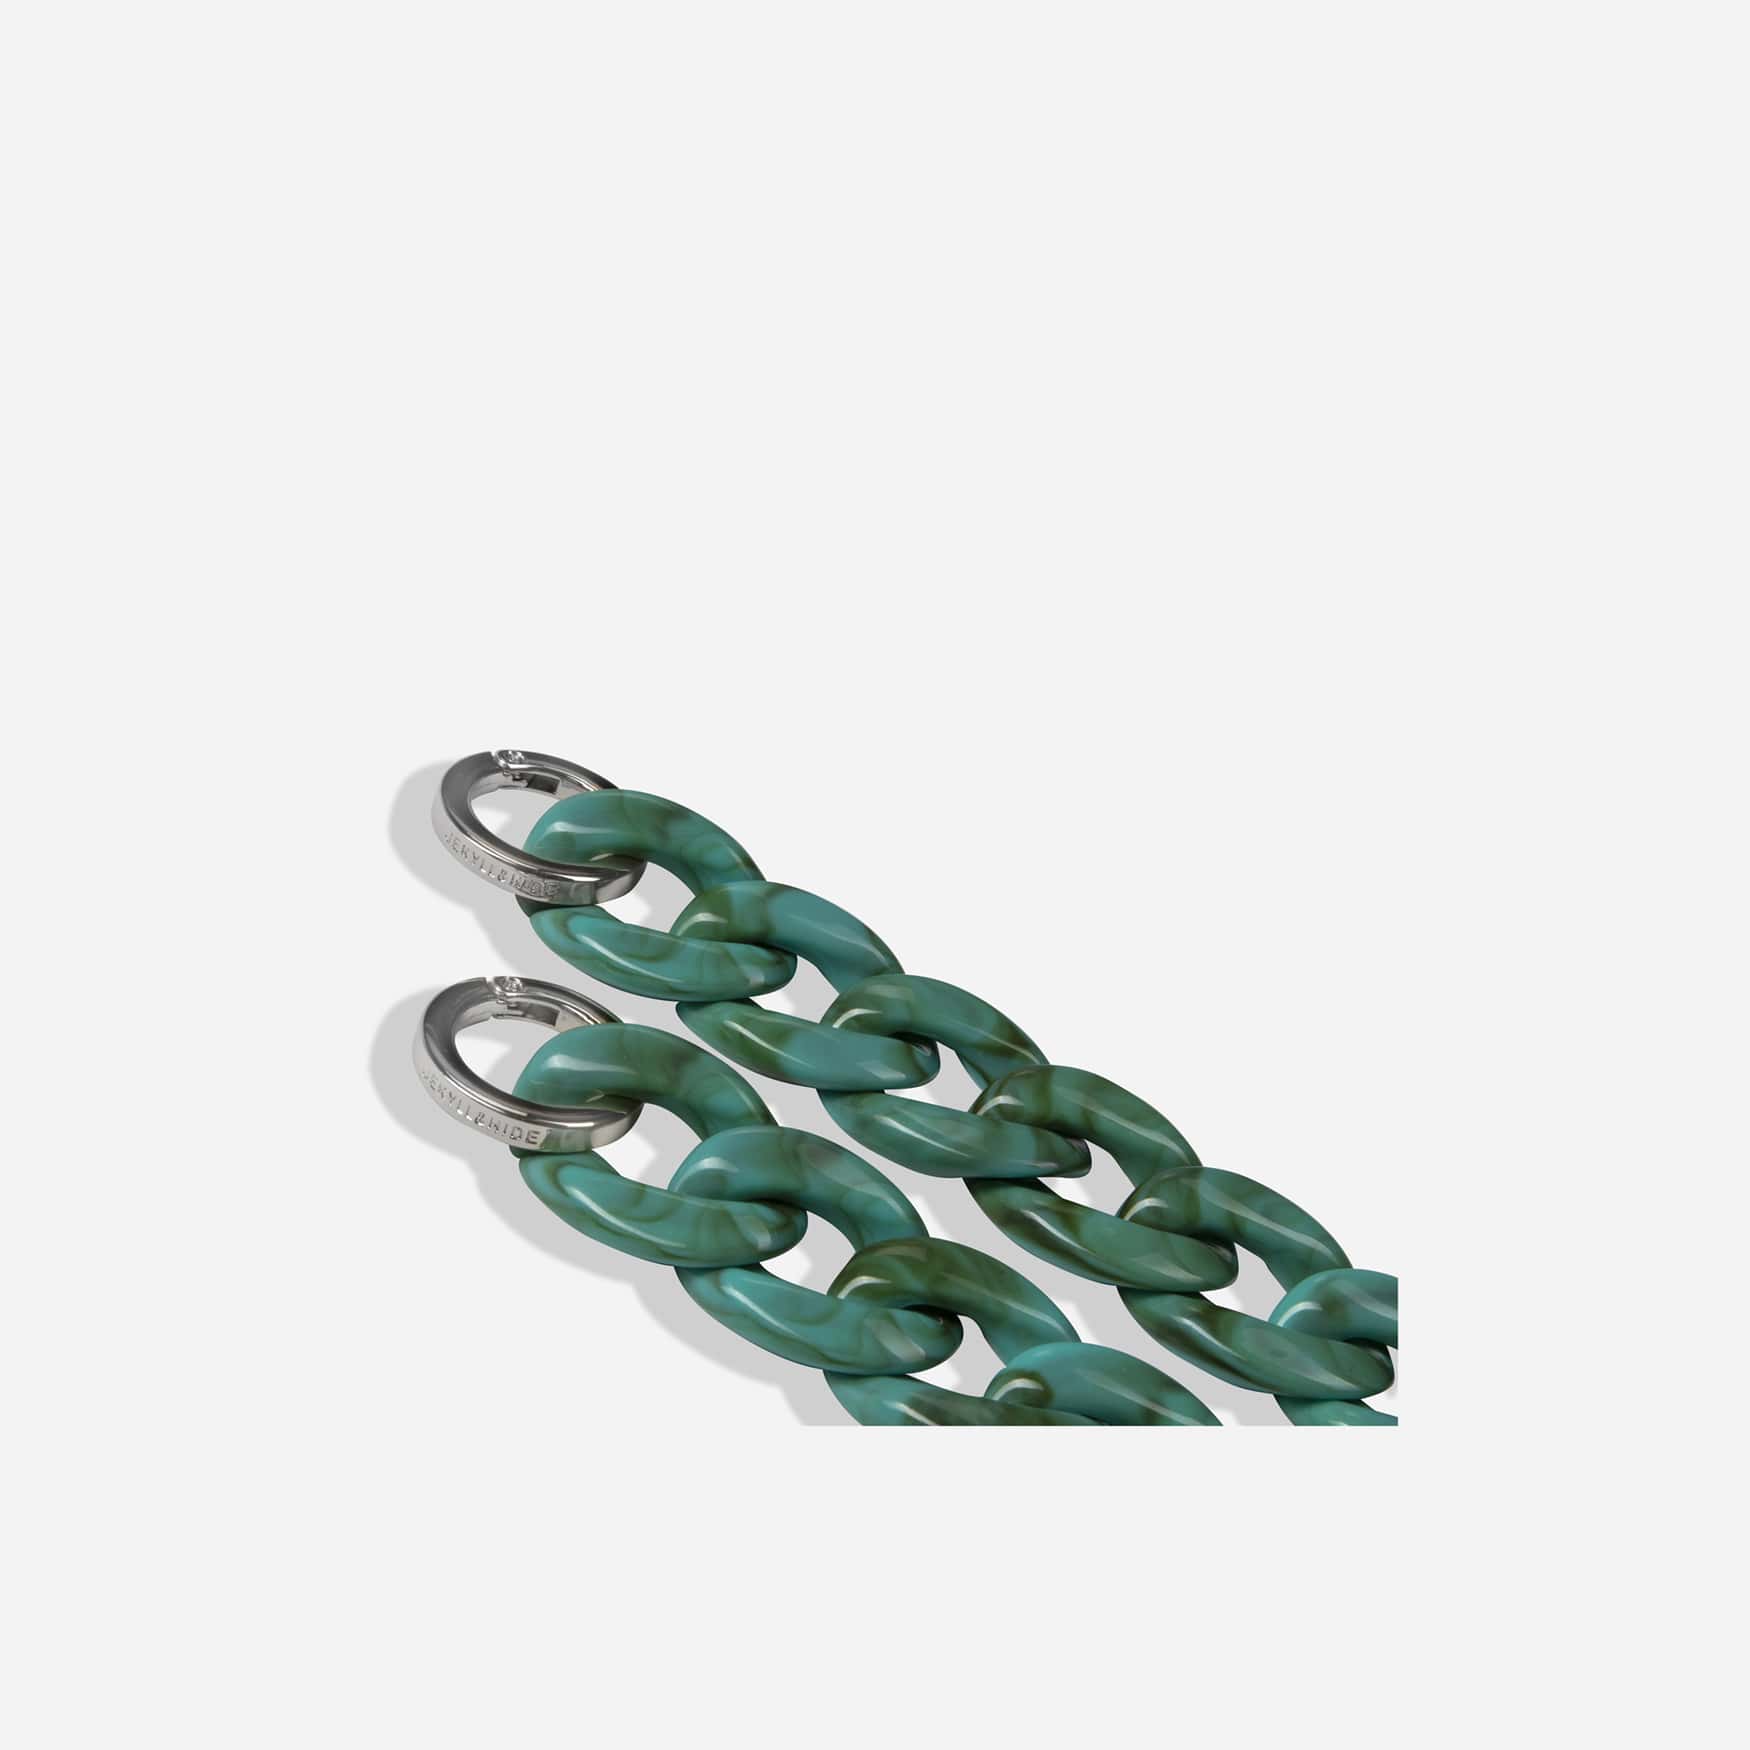 Turquoise Chain Strap